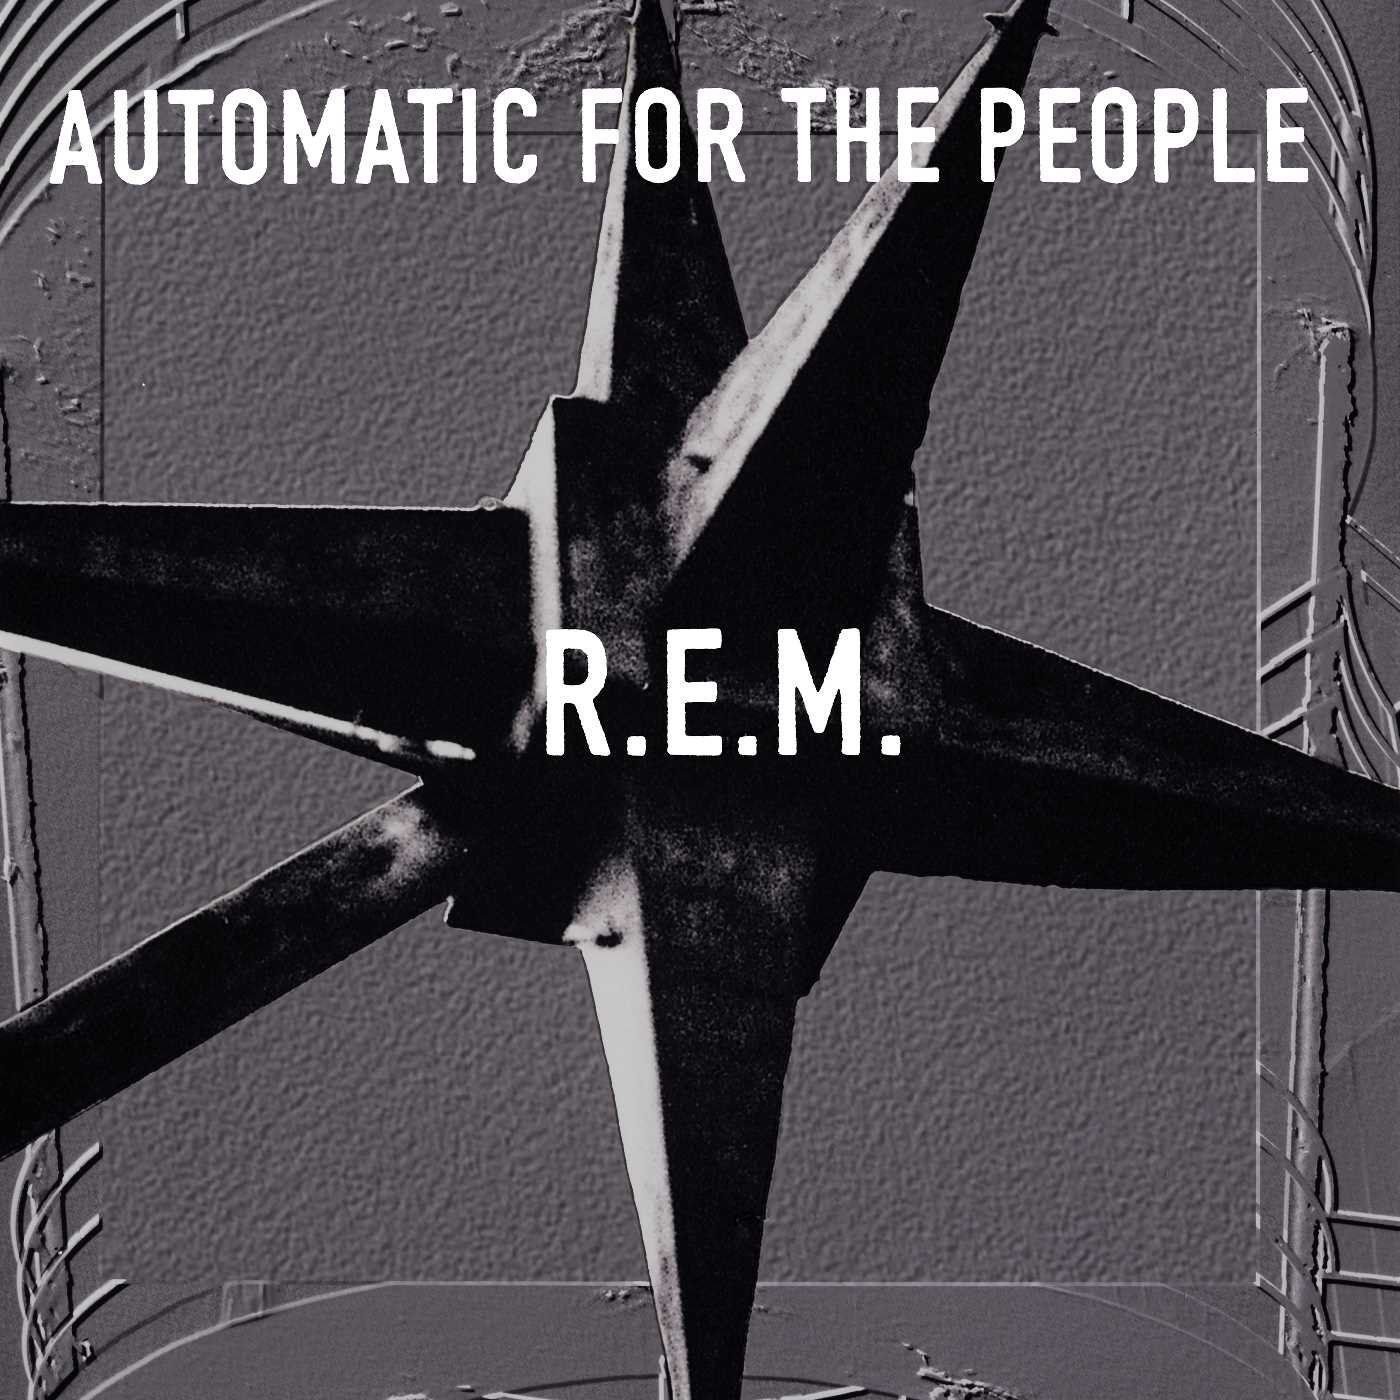 Vinyl Record R.E.M. - Automatic For The People (LP)